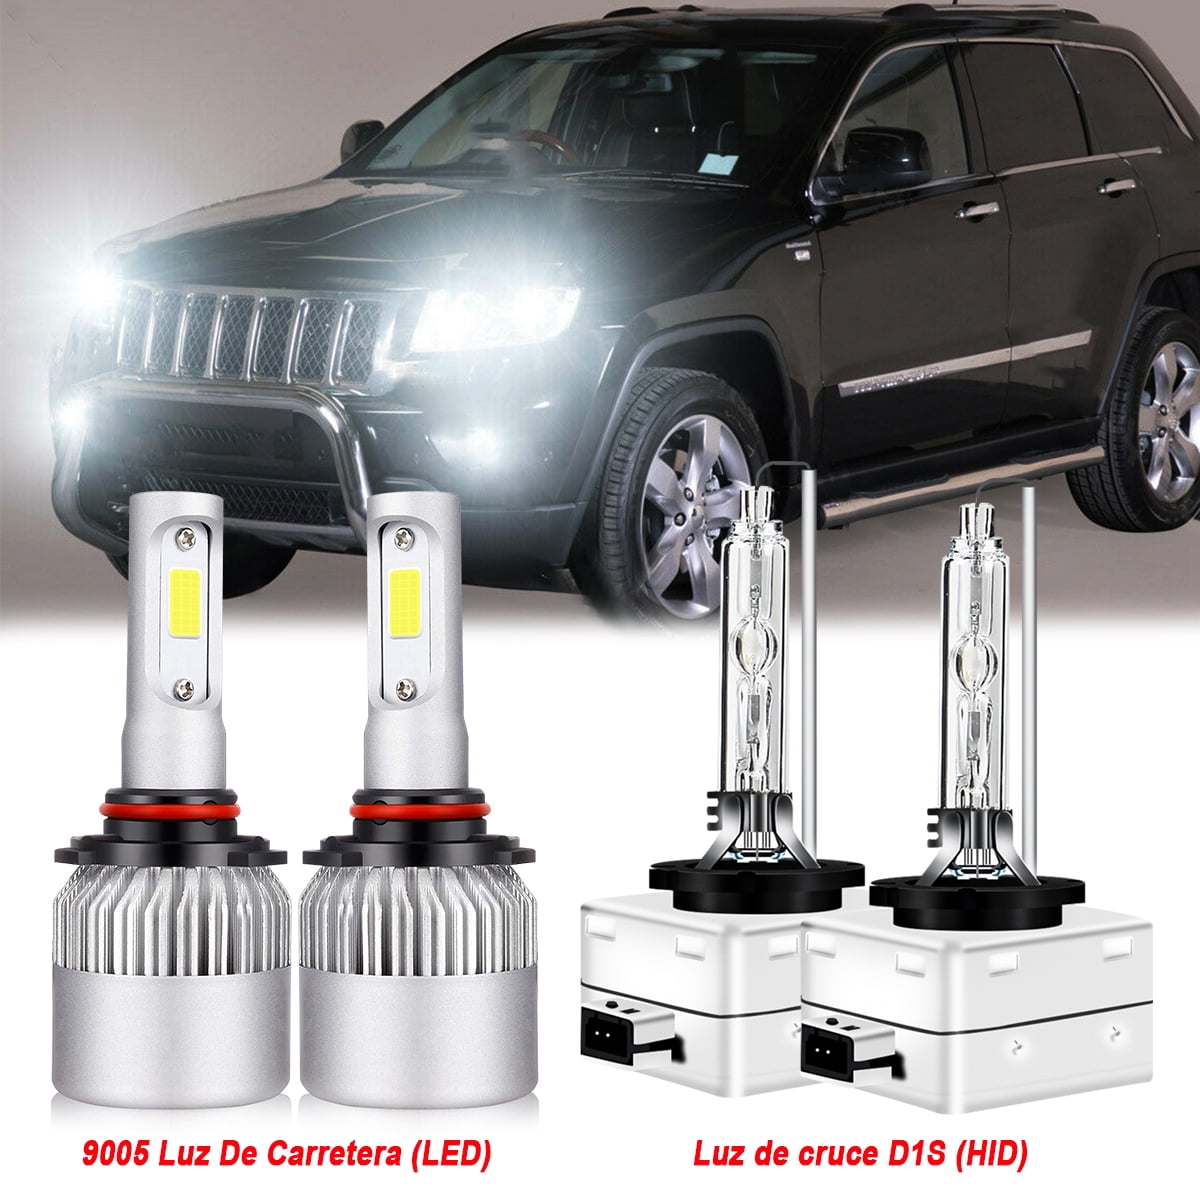 XENTEC LED HID Headlight kit H11 White for 2011-2016 Jeep Grand Cherokee 